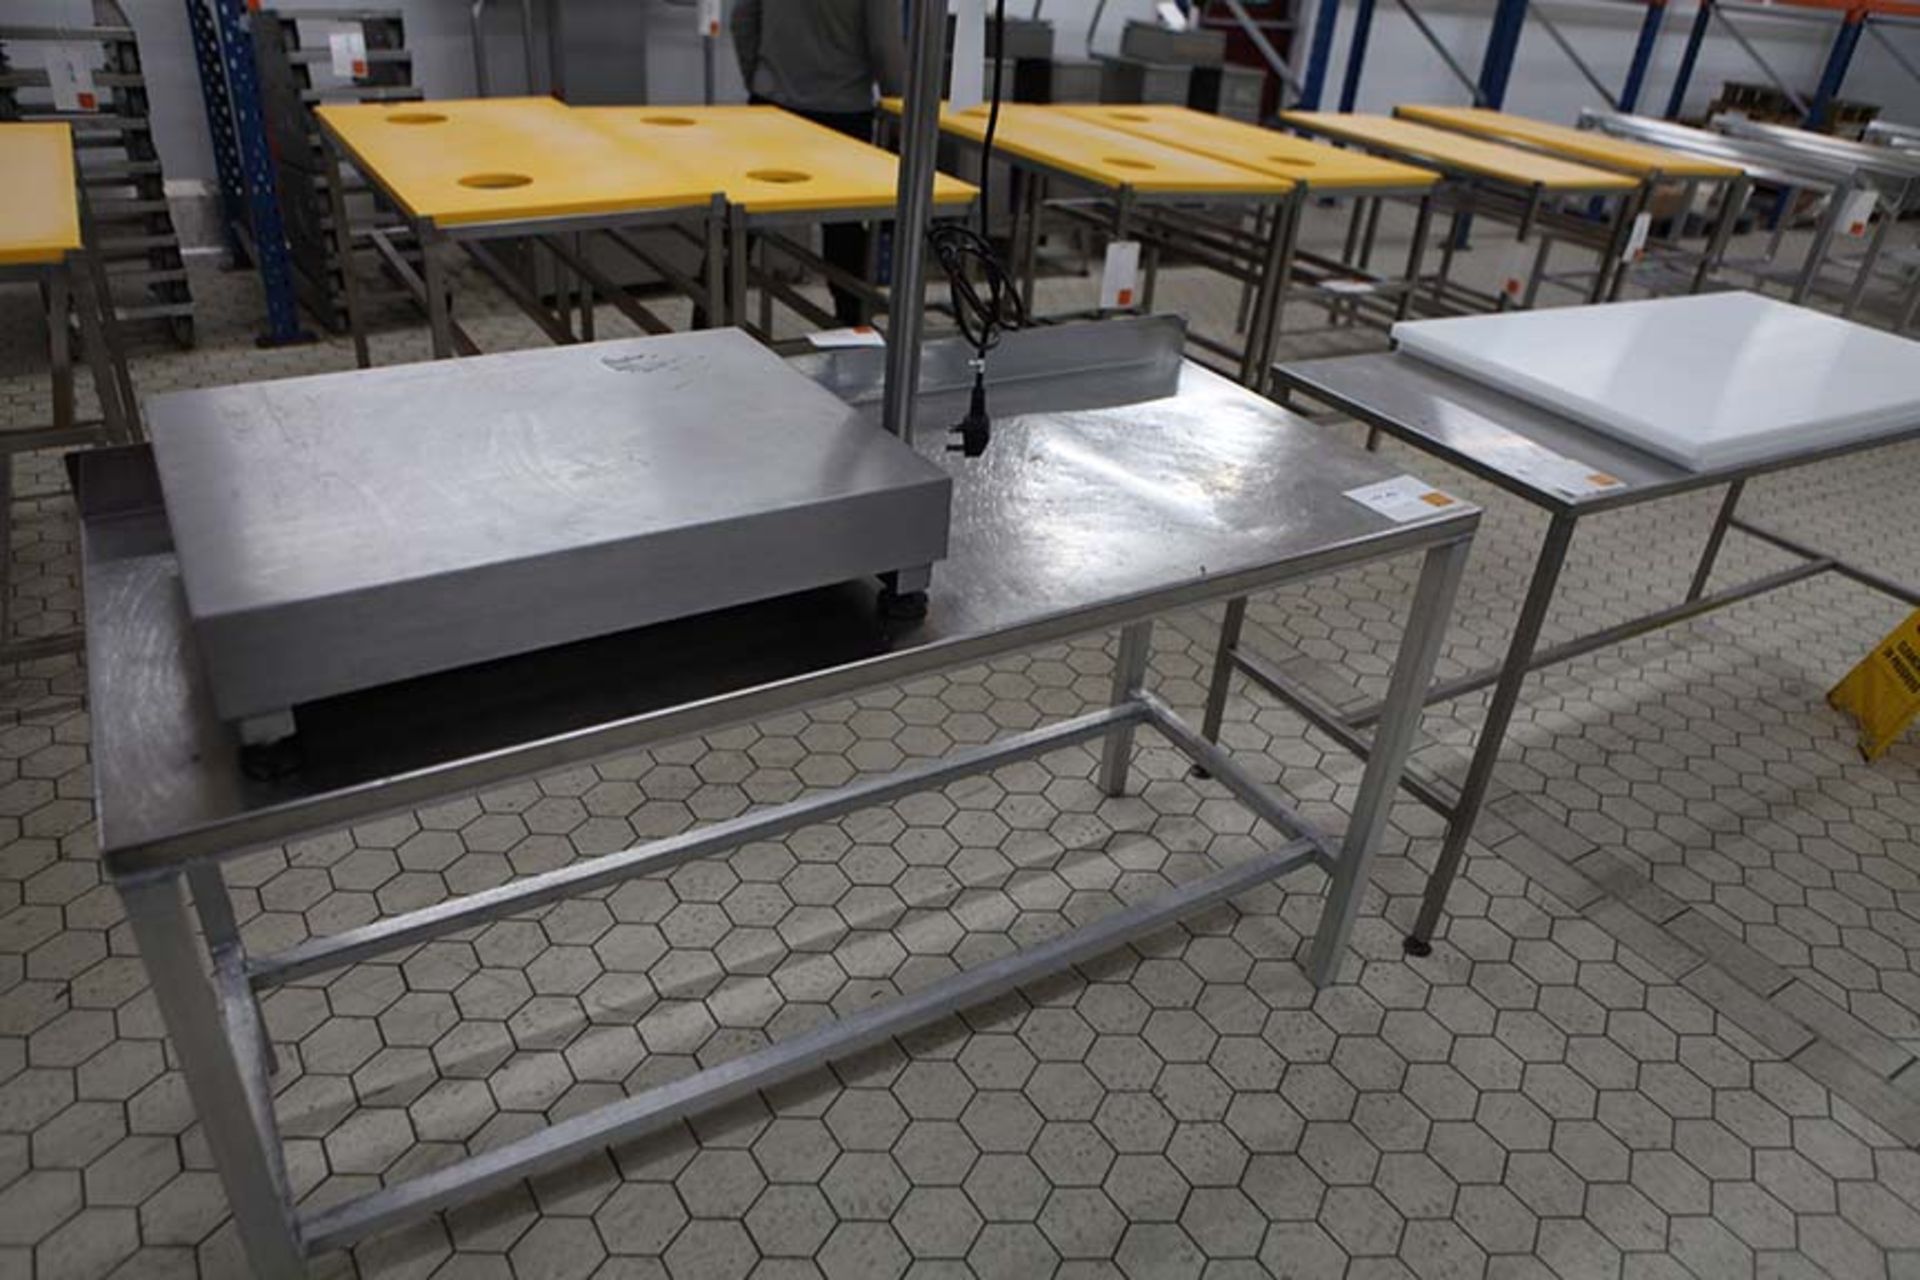 2 Stainless steel topped tables 1800 x 600 and 1530 x 610